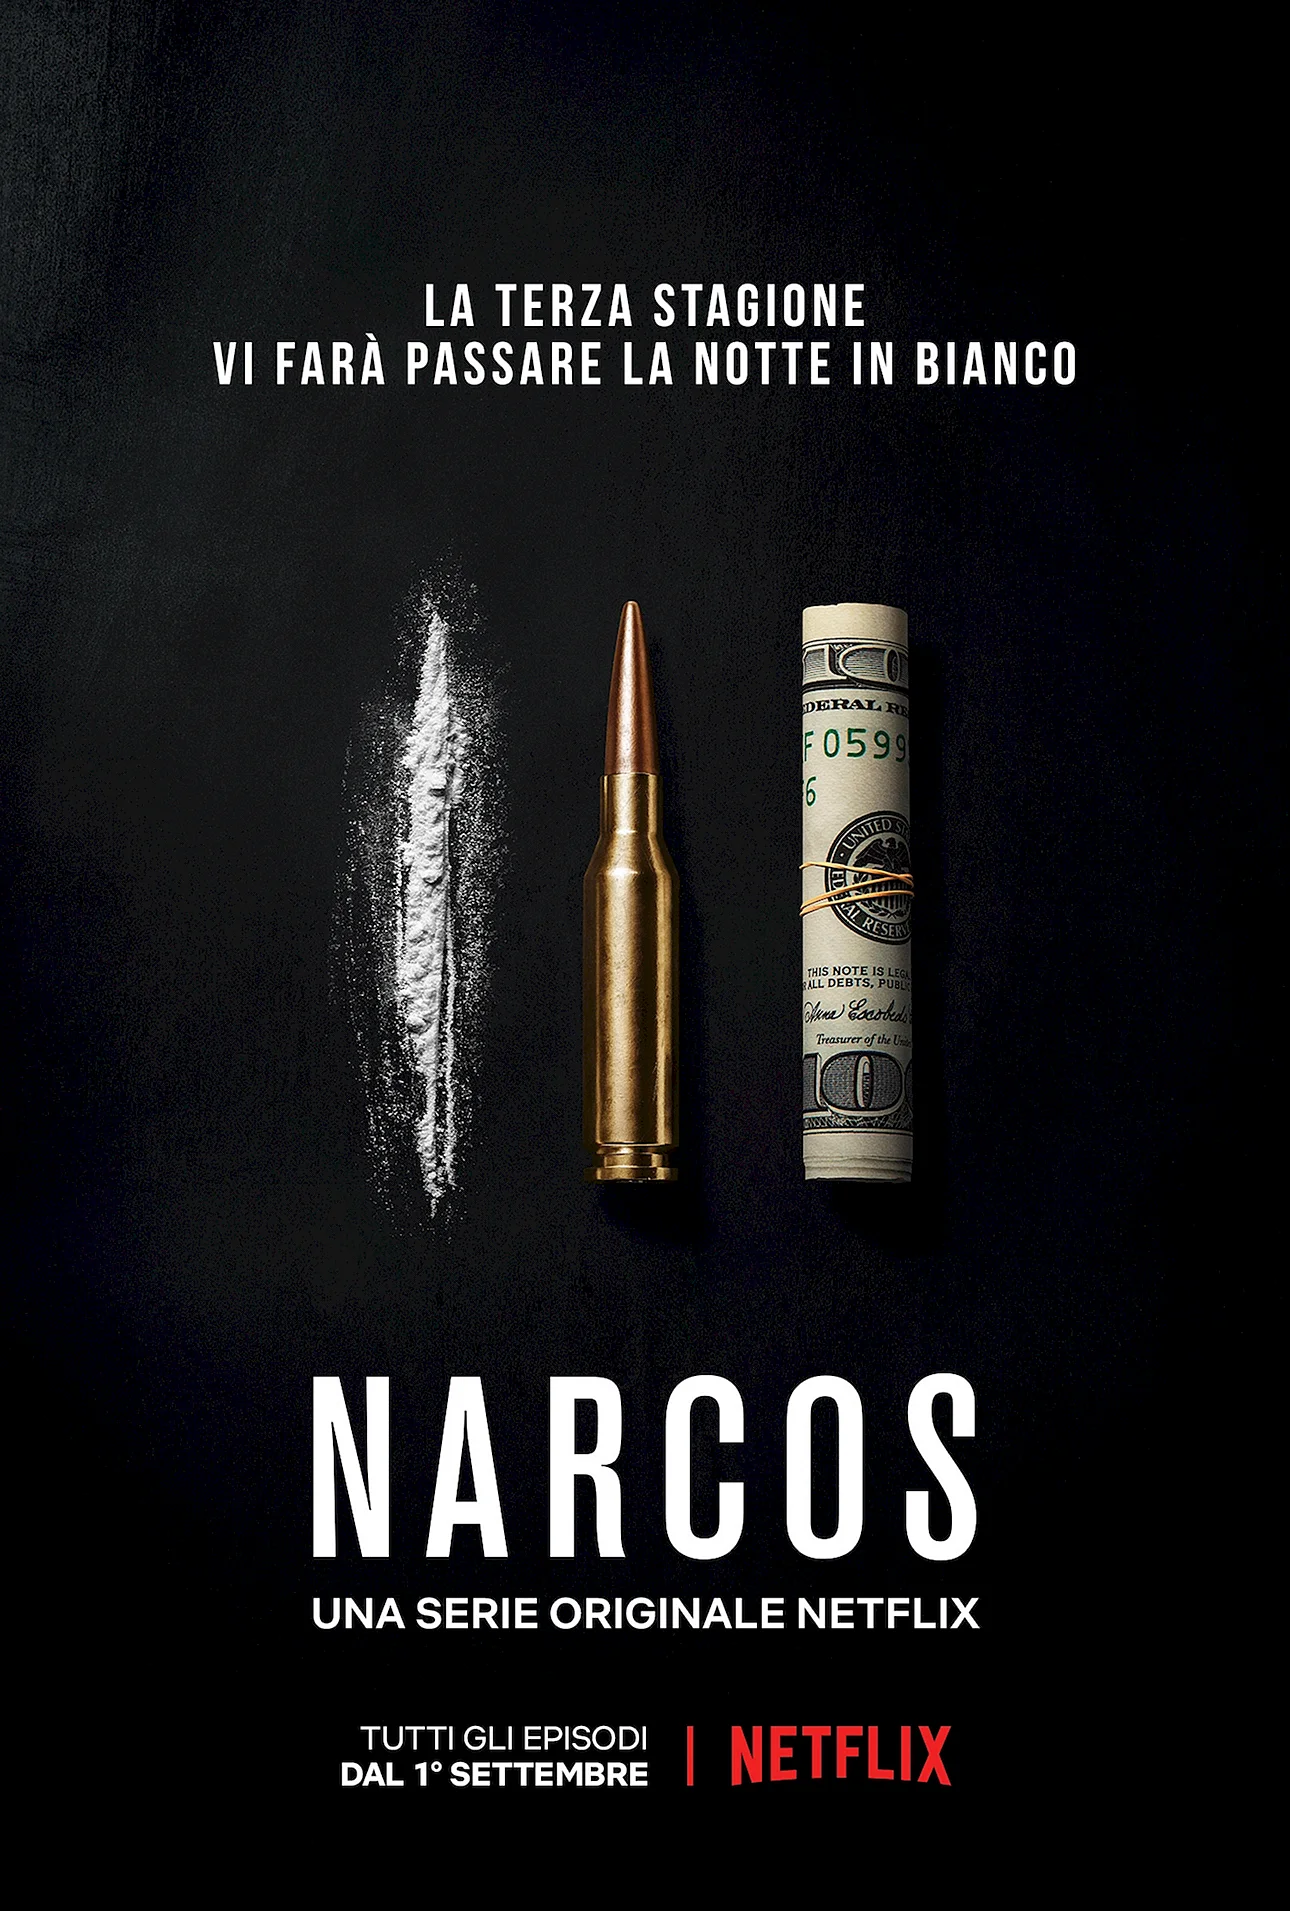 Narcos Poster Wallpaper For iPhone